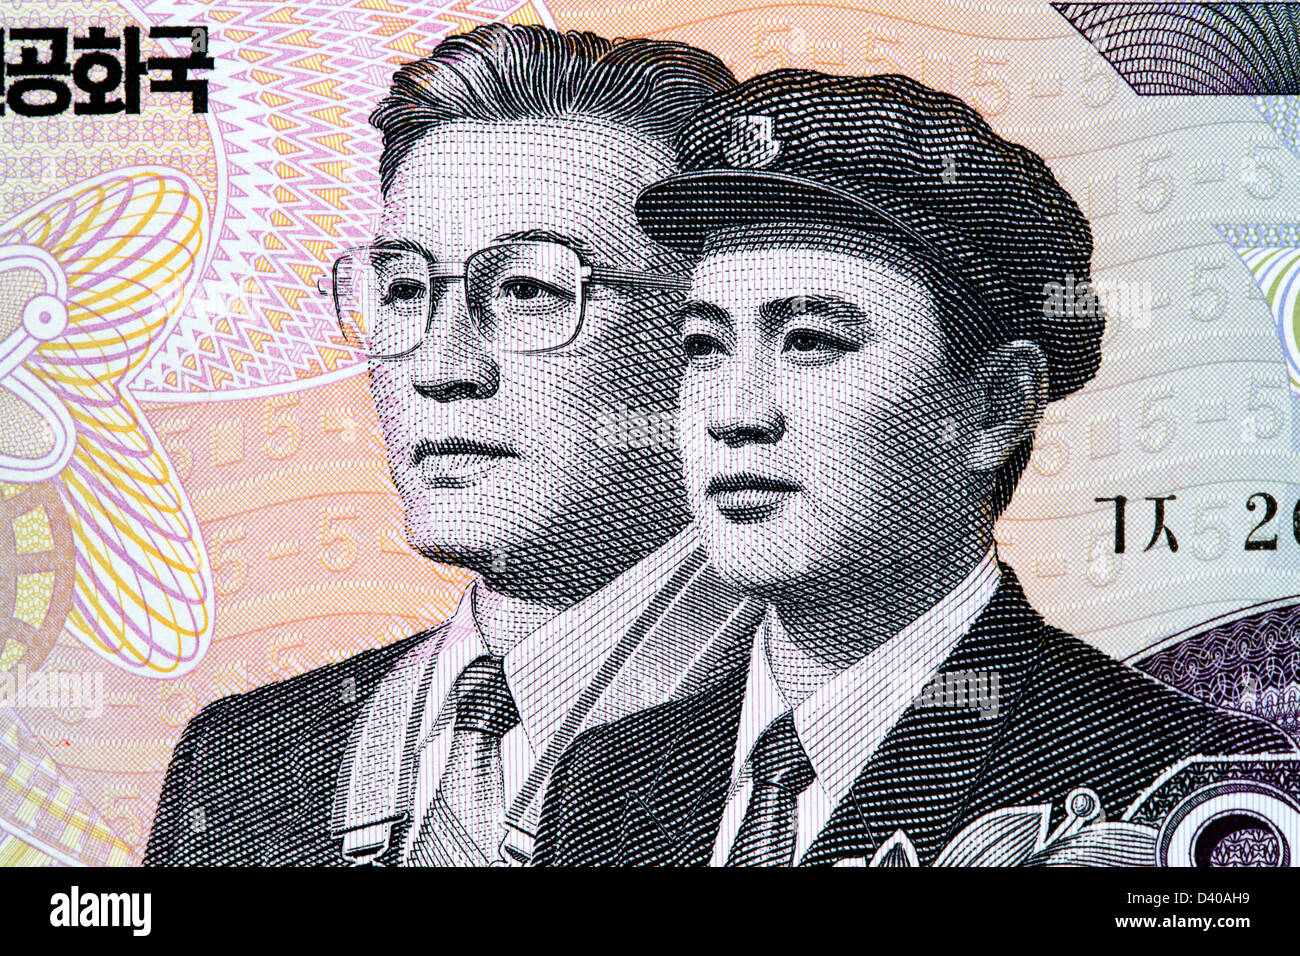 Two men from 5 Won banknote, North Korea, 2002 Stock Photo